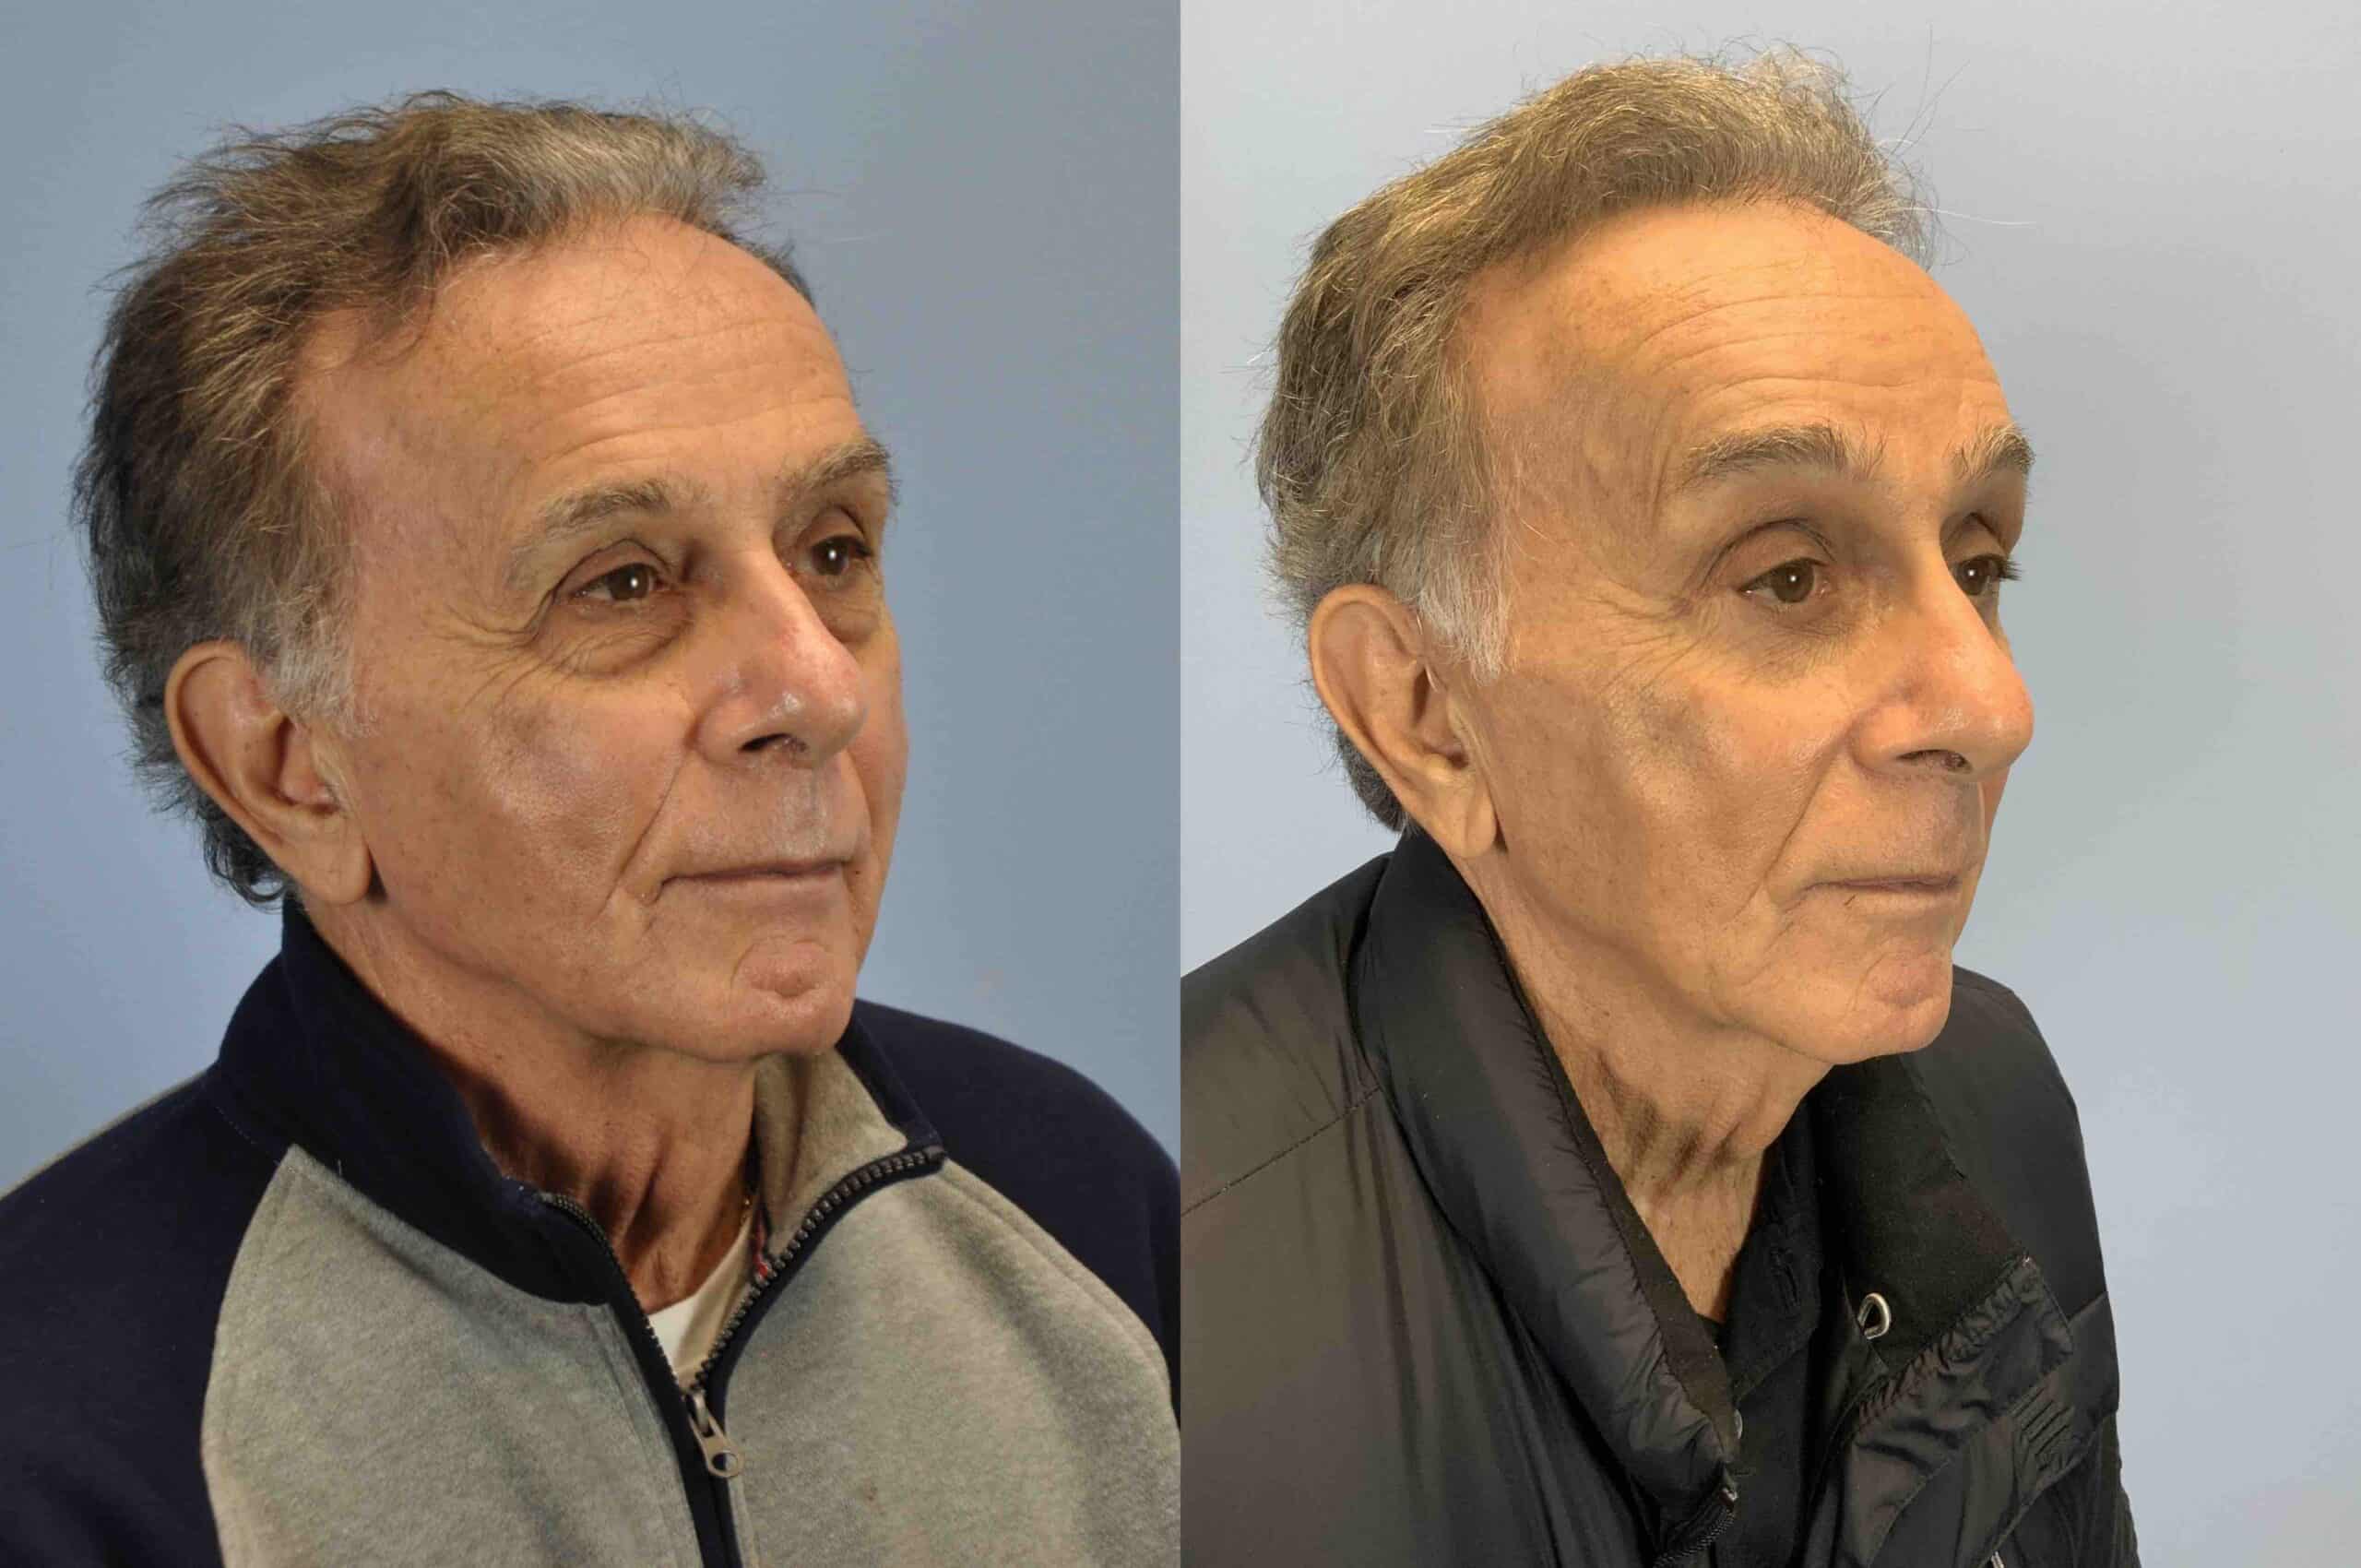 Before and after, 8 mo post op after Upper and Lower Blepharoplasty, Endo Brow Lift performed by Dr. Paul Vanek (diagonal view)